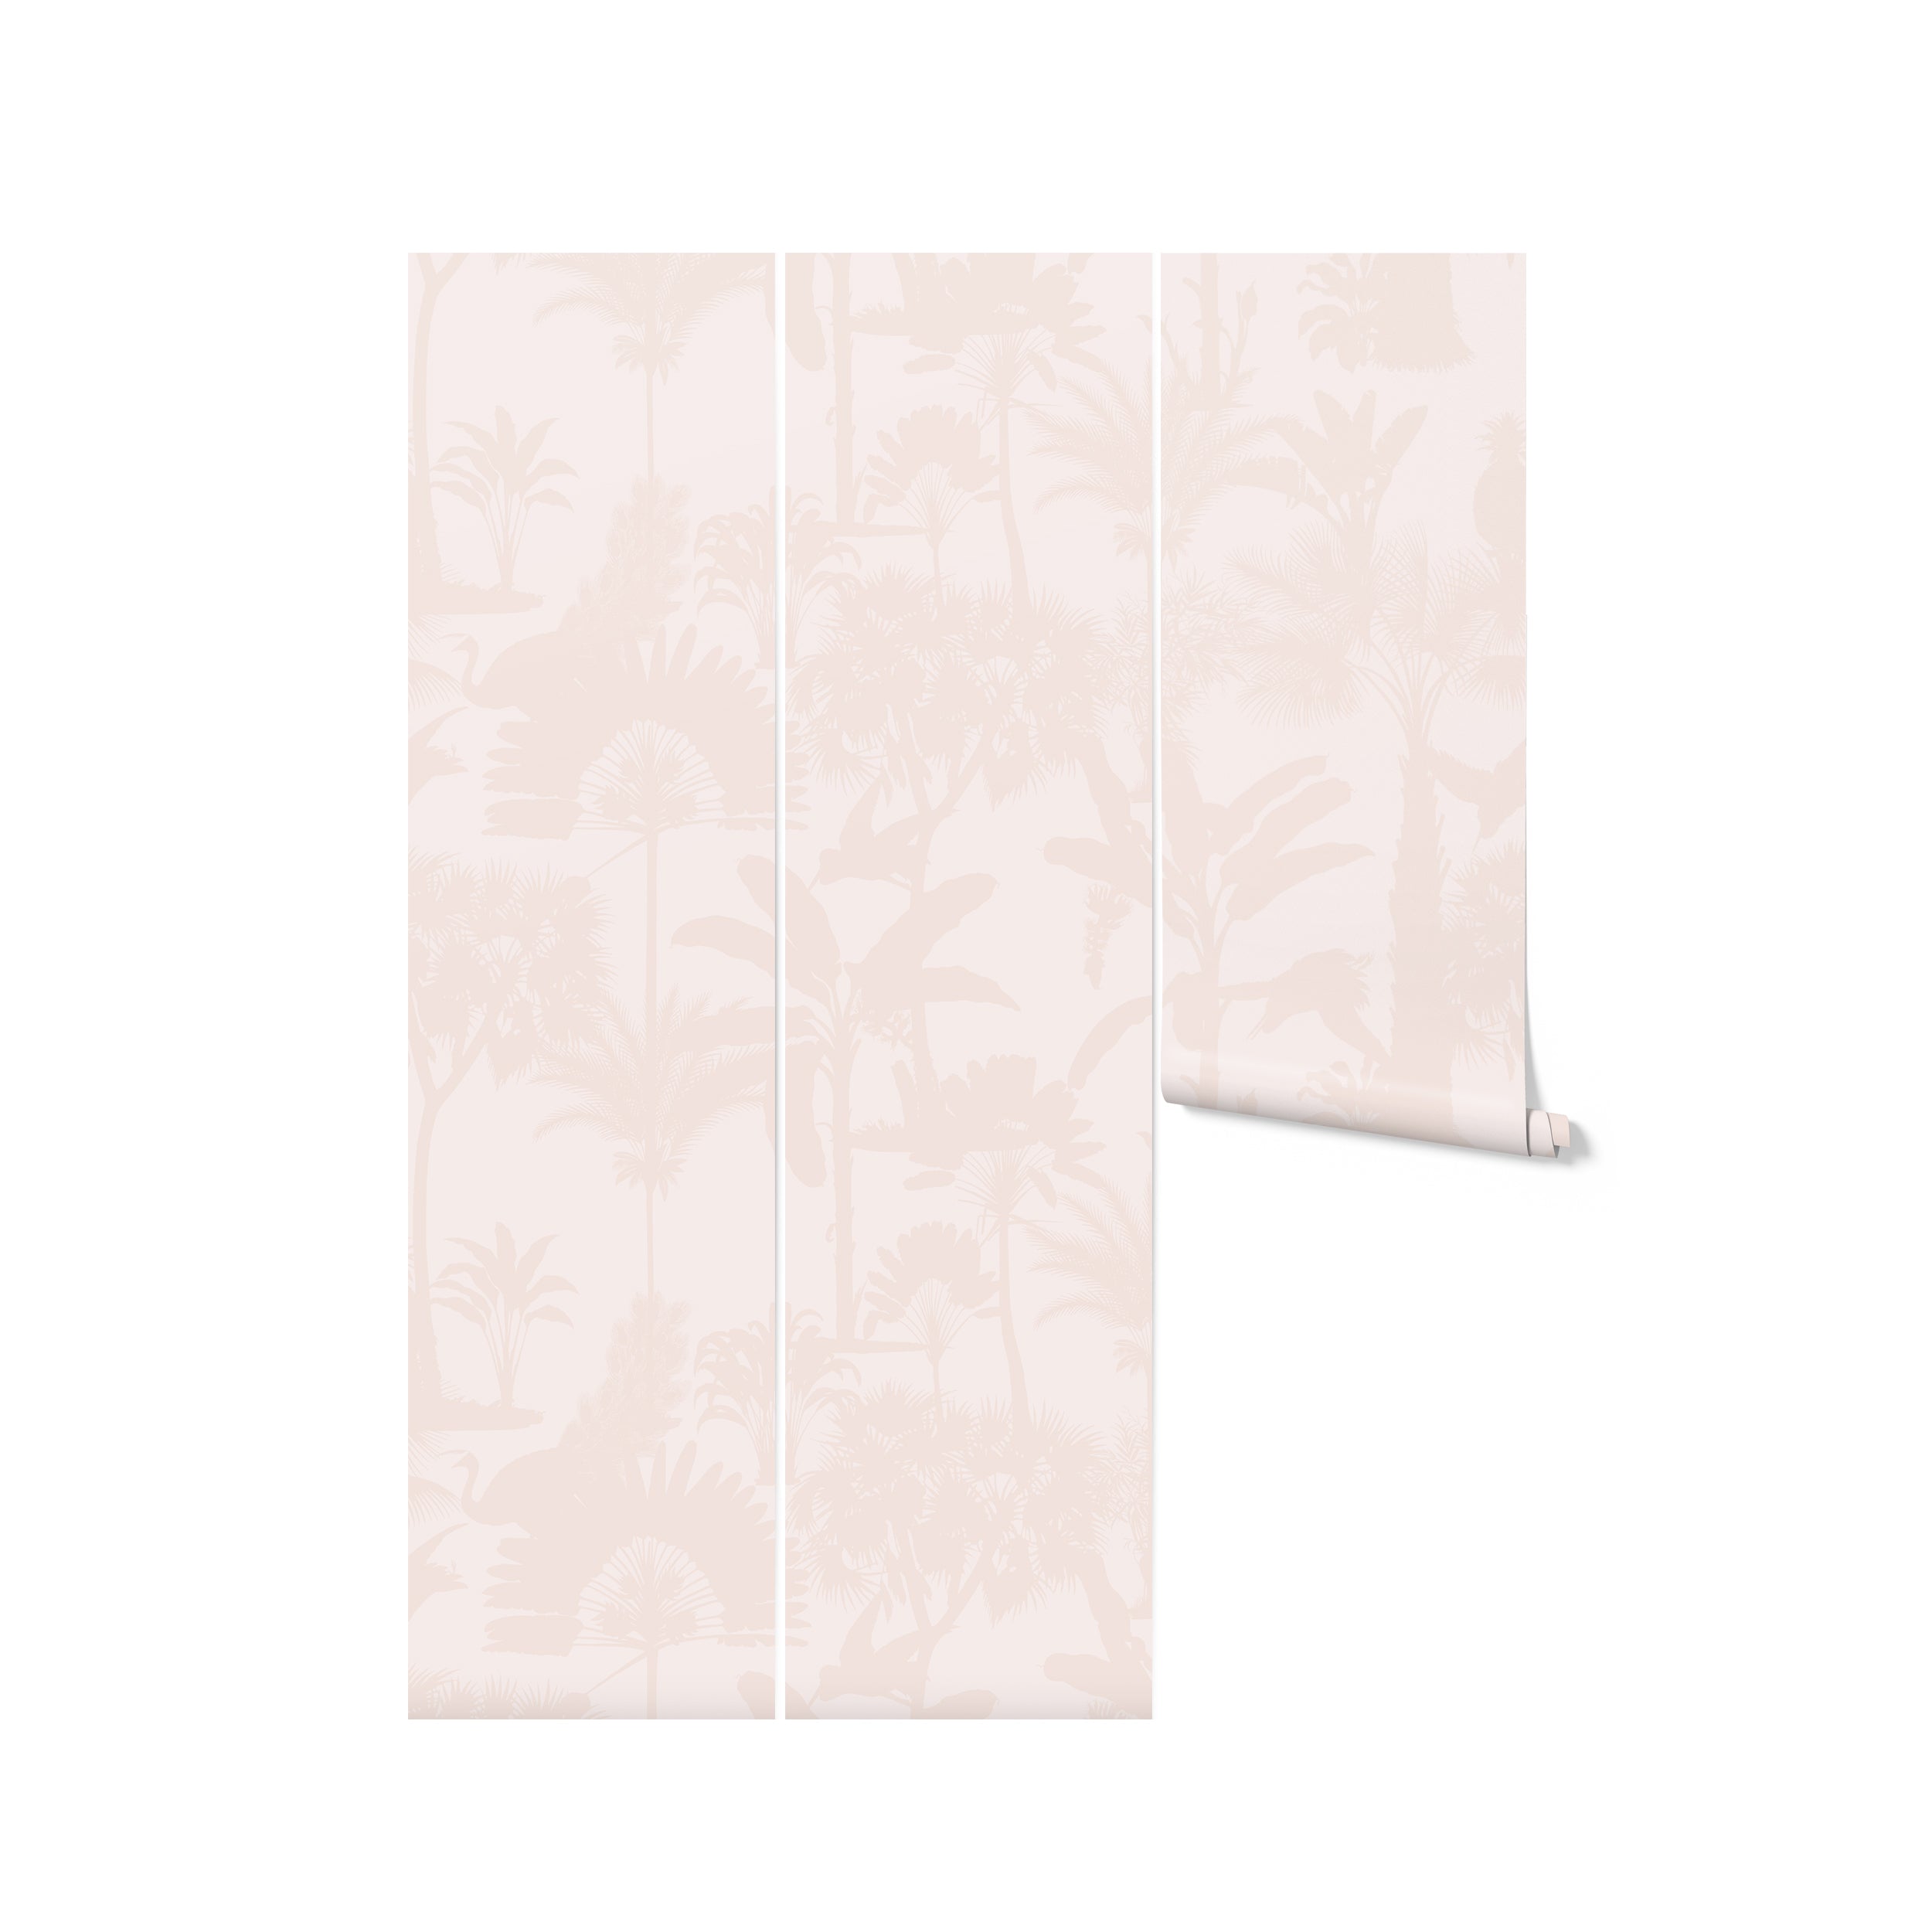 Vertical image of Exotic Silhouette Wallpaper panels, featuring delicate white outlines of tropical plants and trees on a soft pink background. The design exudes a peaceful and chic vibe, ideal for modern home decor.